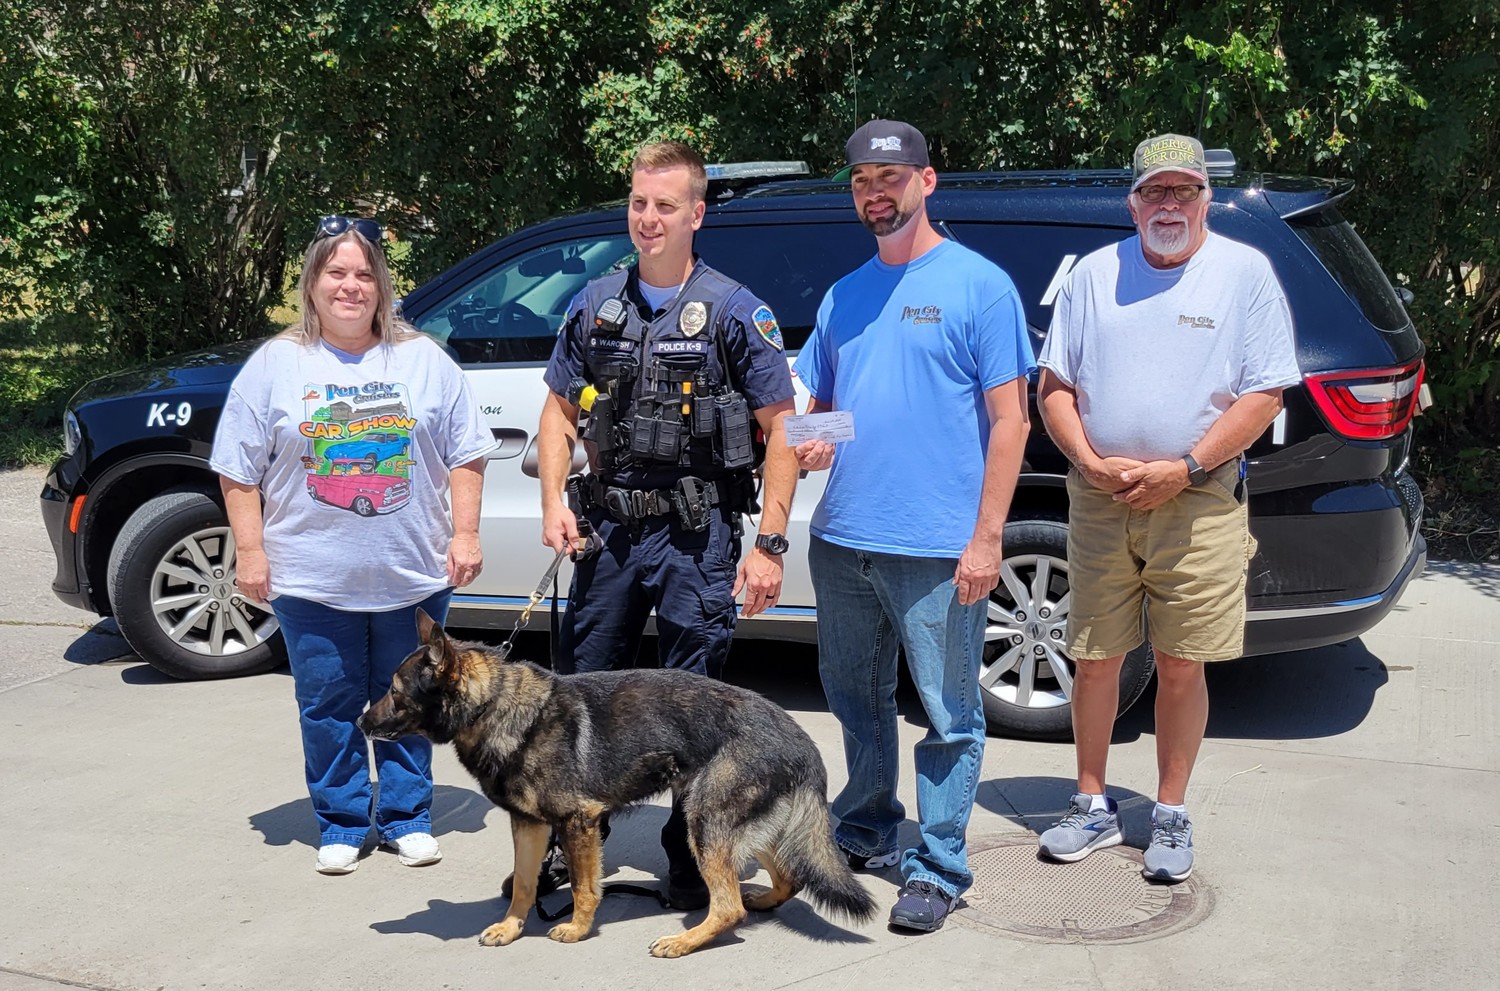 From left to right Kim Krogmeier (Pen City Crusider Club Treasurer), FMPD K9 officer Greg Warosh with K9 Norik in front, Chad Schneider (President), and Ron Tanner (Vice President) Not pictured is Jessica Weiler (Club secretary). The club presented the FMPD with $1,000 to be used for the K9 unit. Courtesy photo.